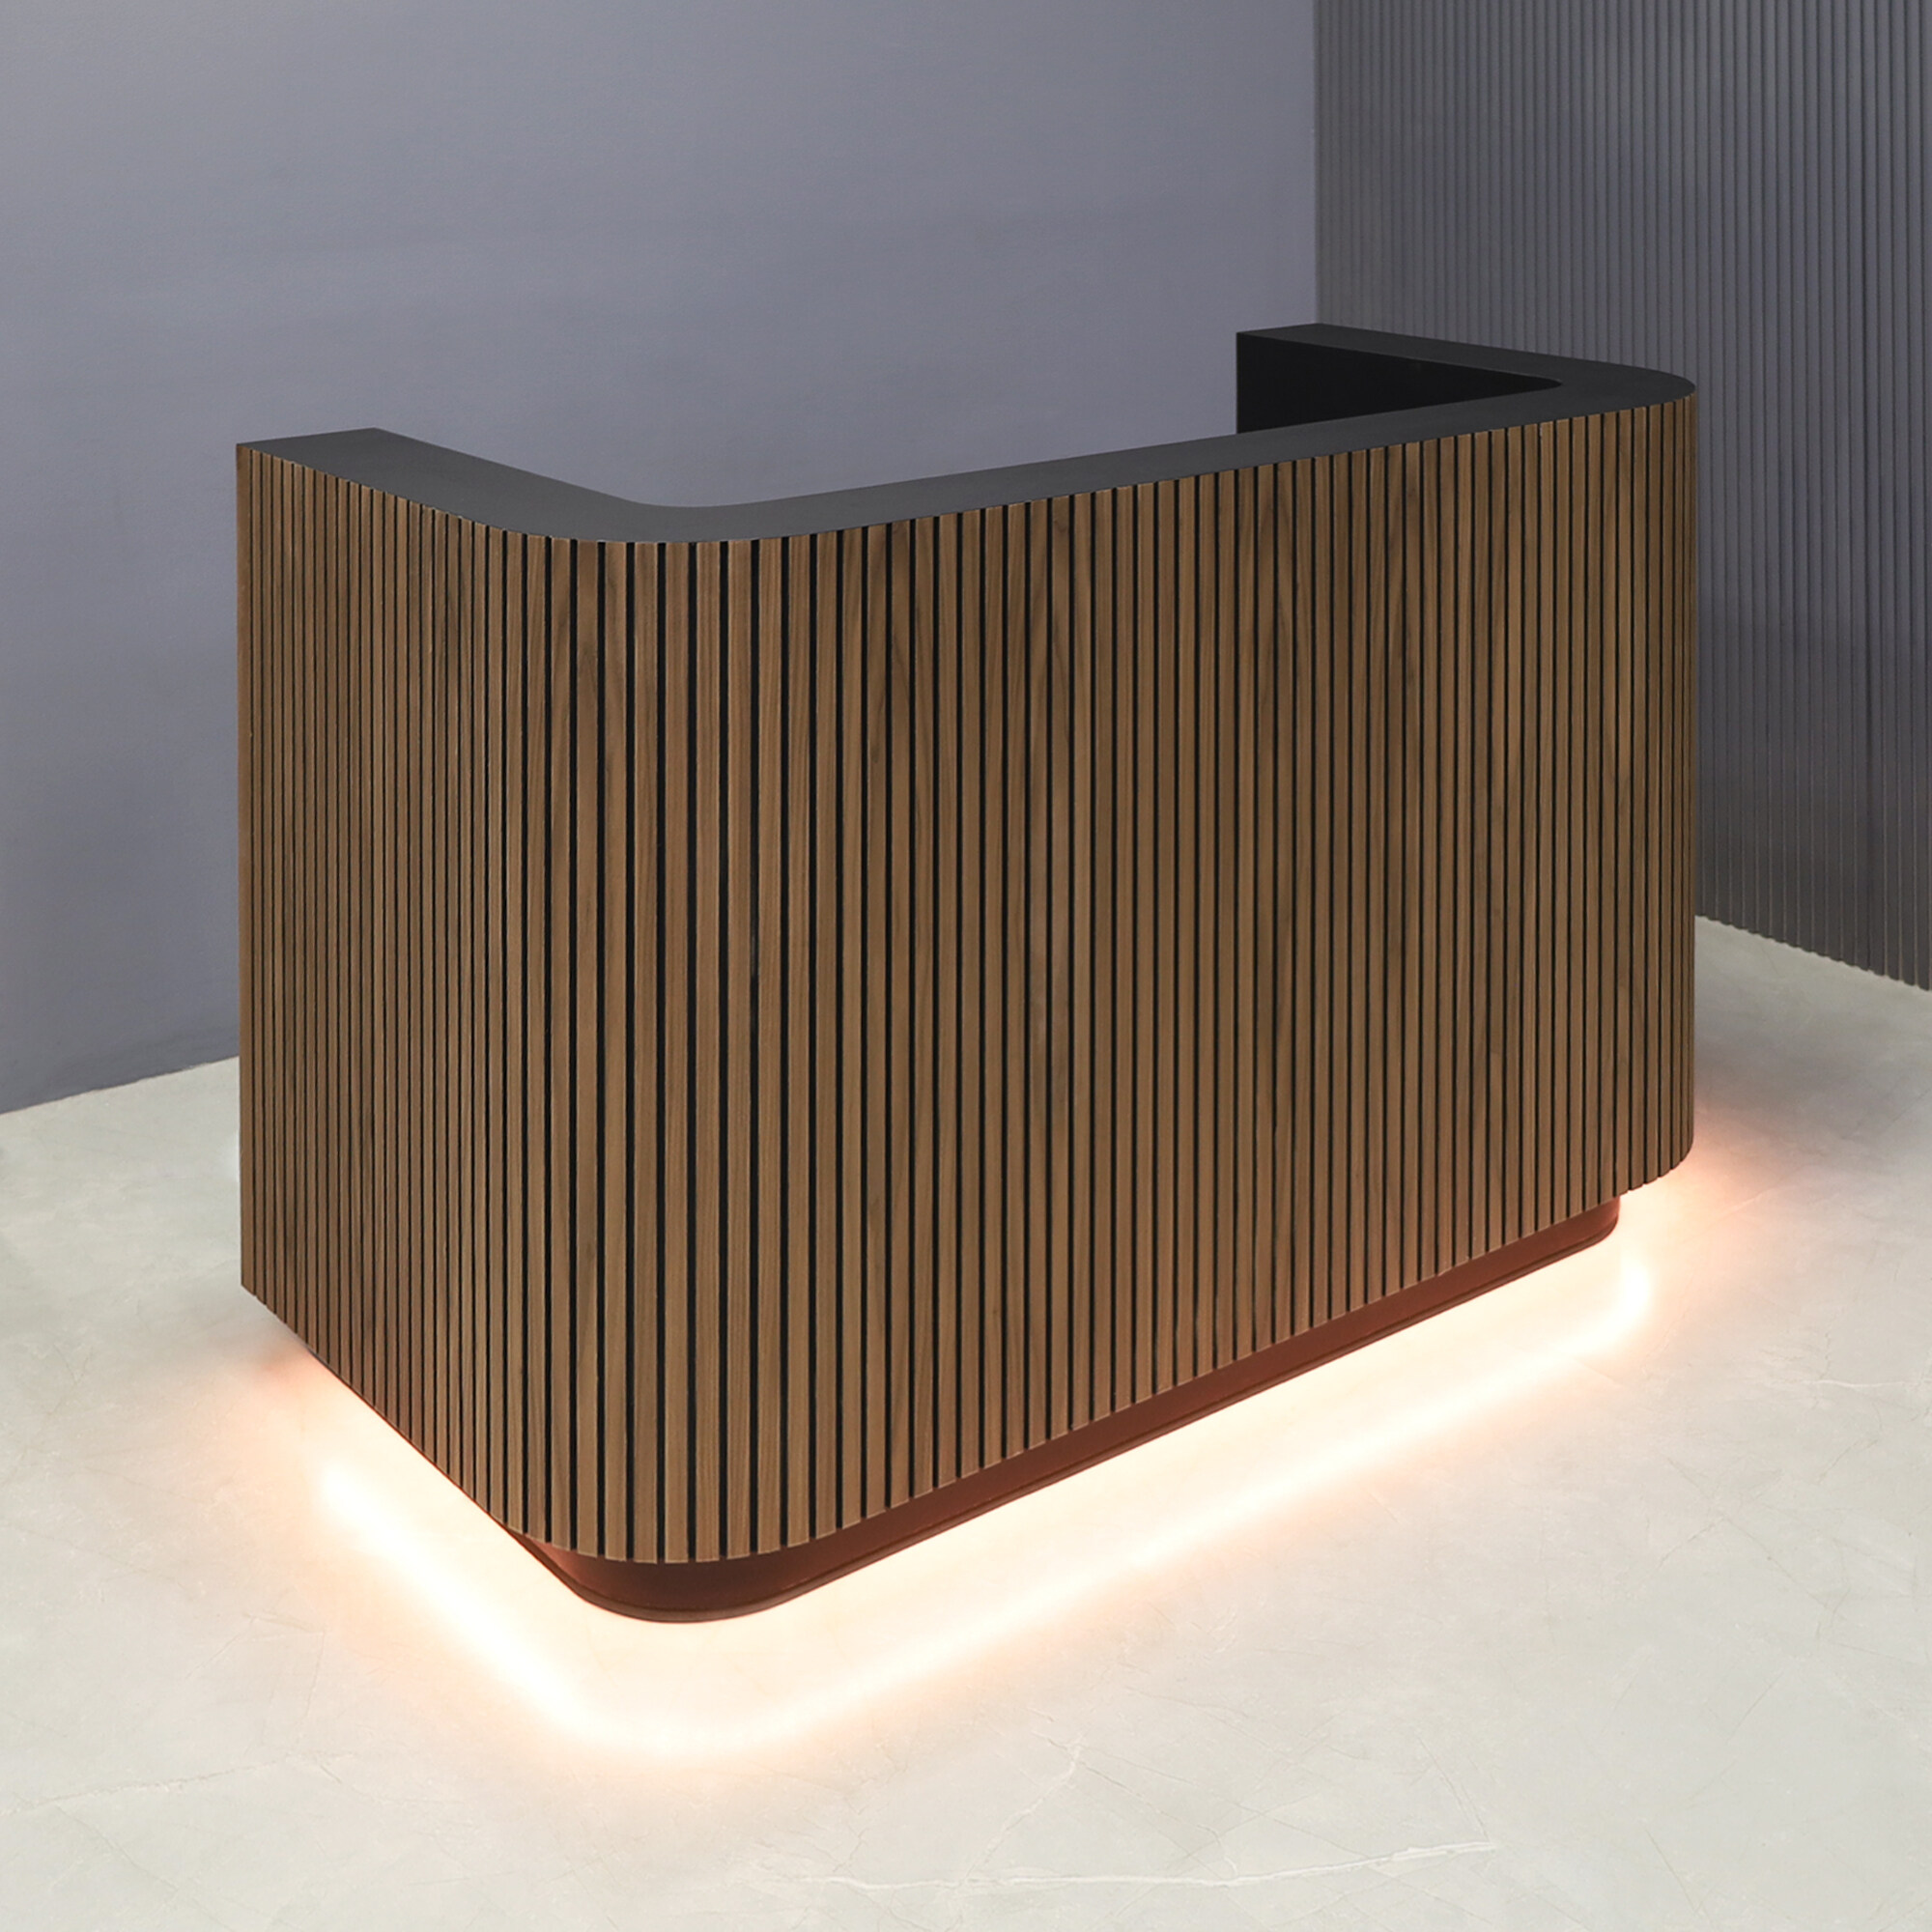 60-inch Nola Custom Reception Desk in walnut tambour main desk and black traceless laminate workspace and toe-kick, with warm white LED, shown here.